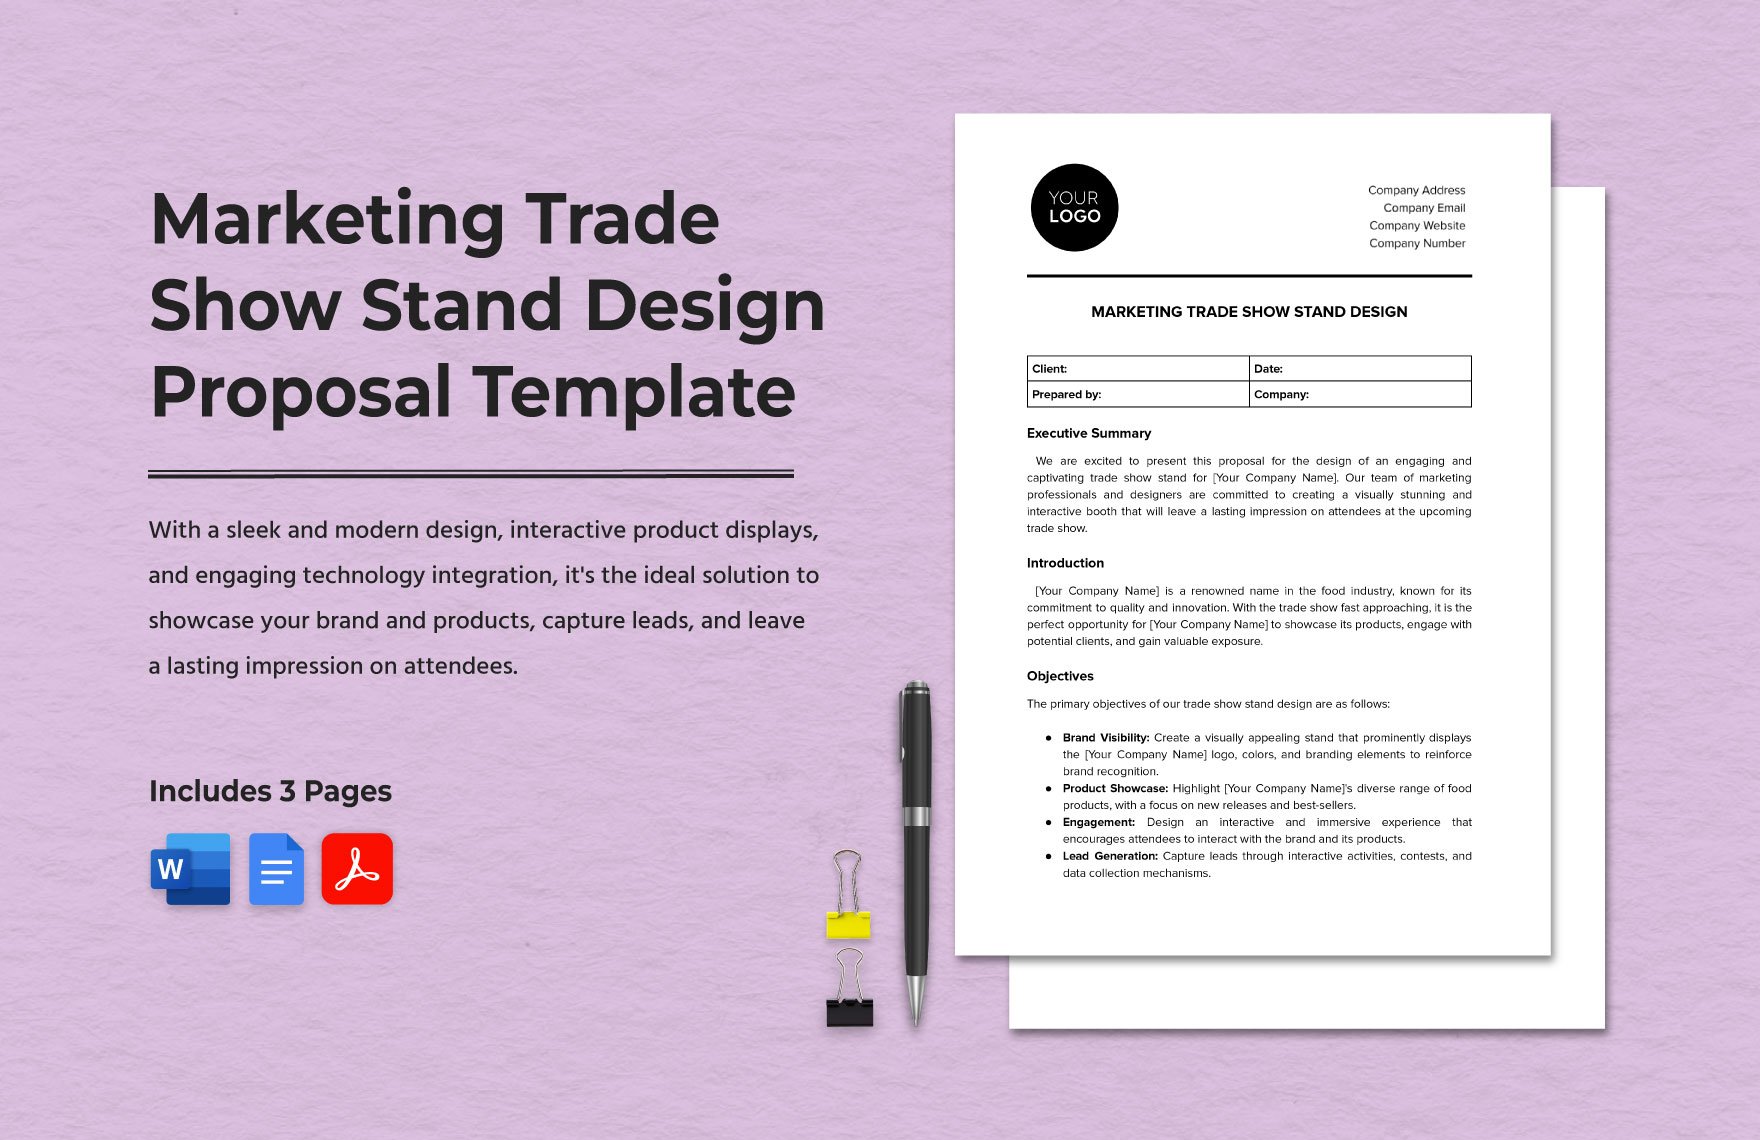 Marketing Trade Show Stand Design Proposal Template